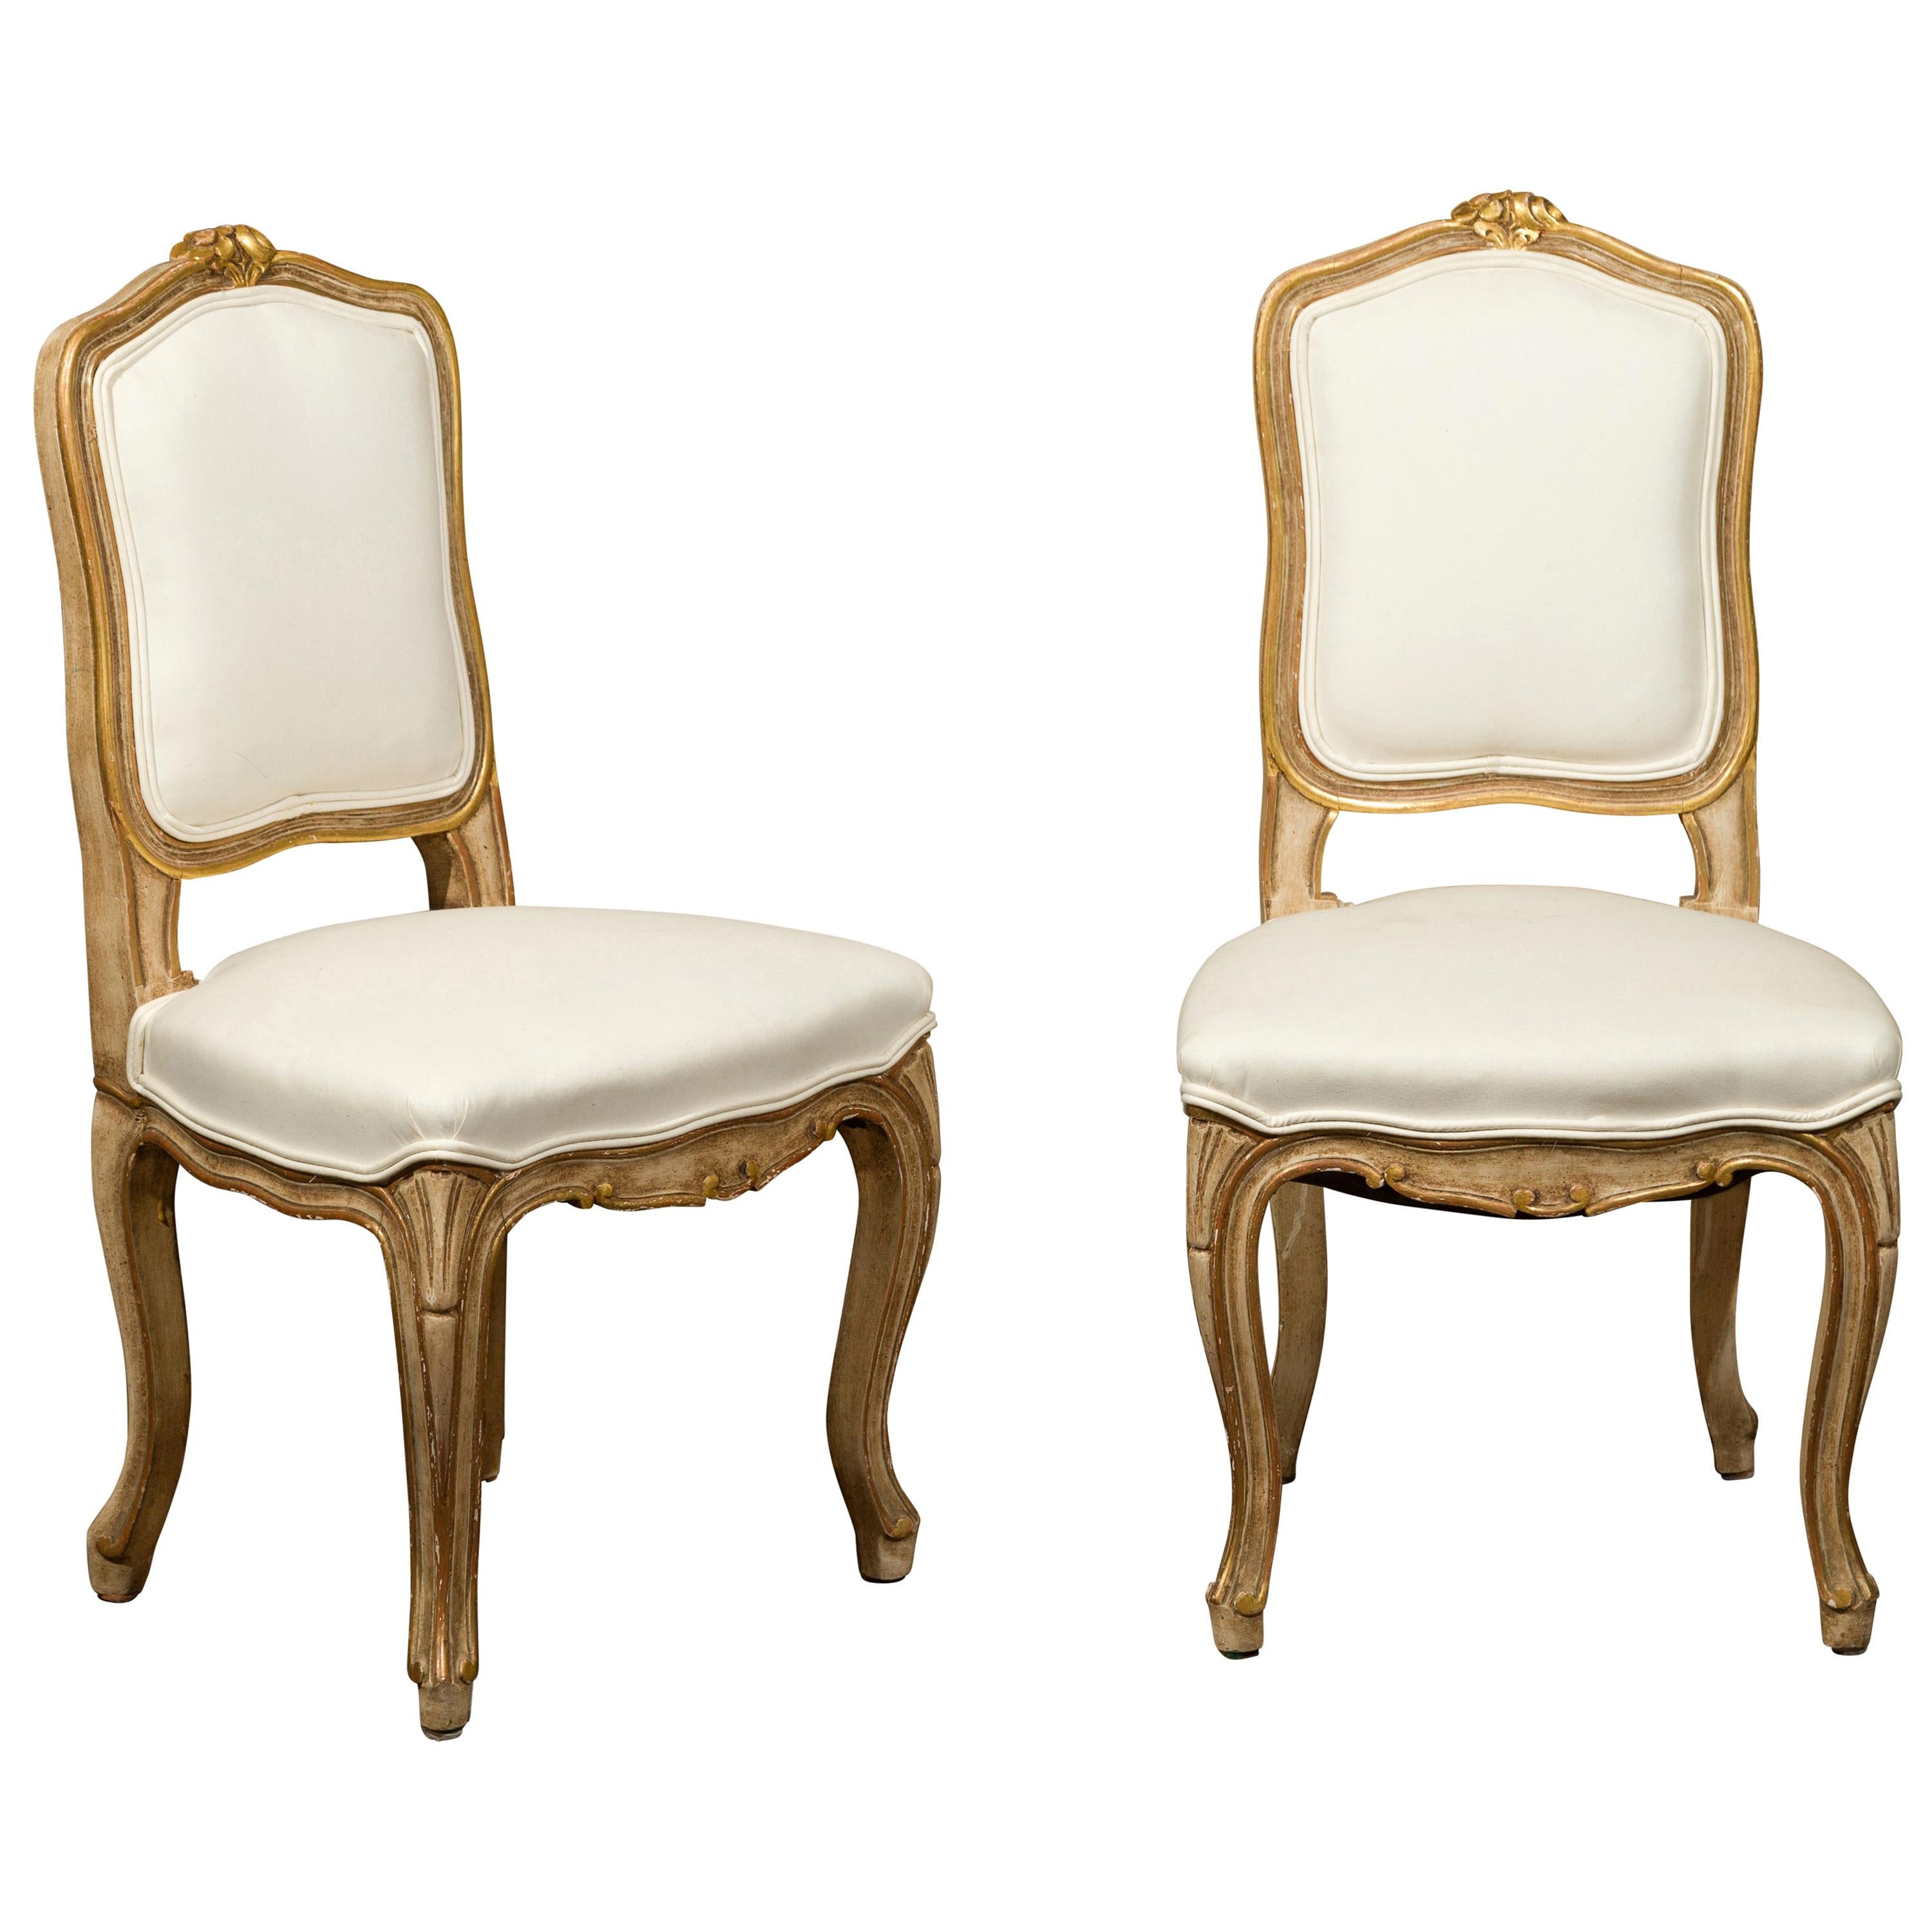 Pair of 1920s Louis XV Style Painted and Gilt Child's Chairs with Carved Flowers For Sale